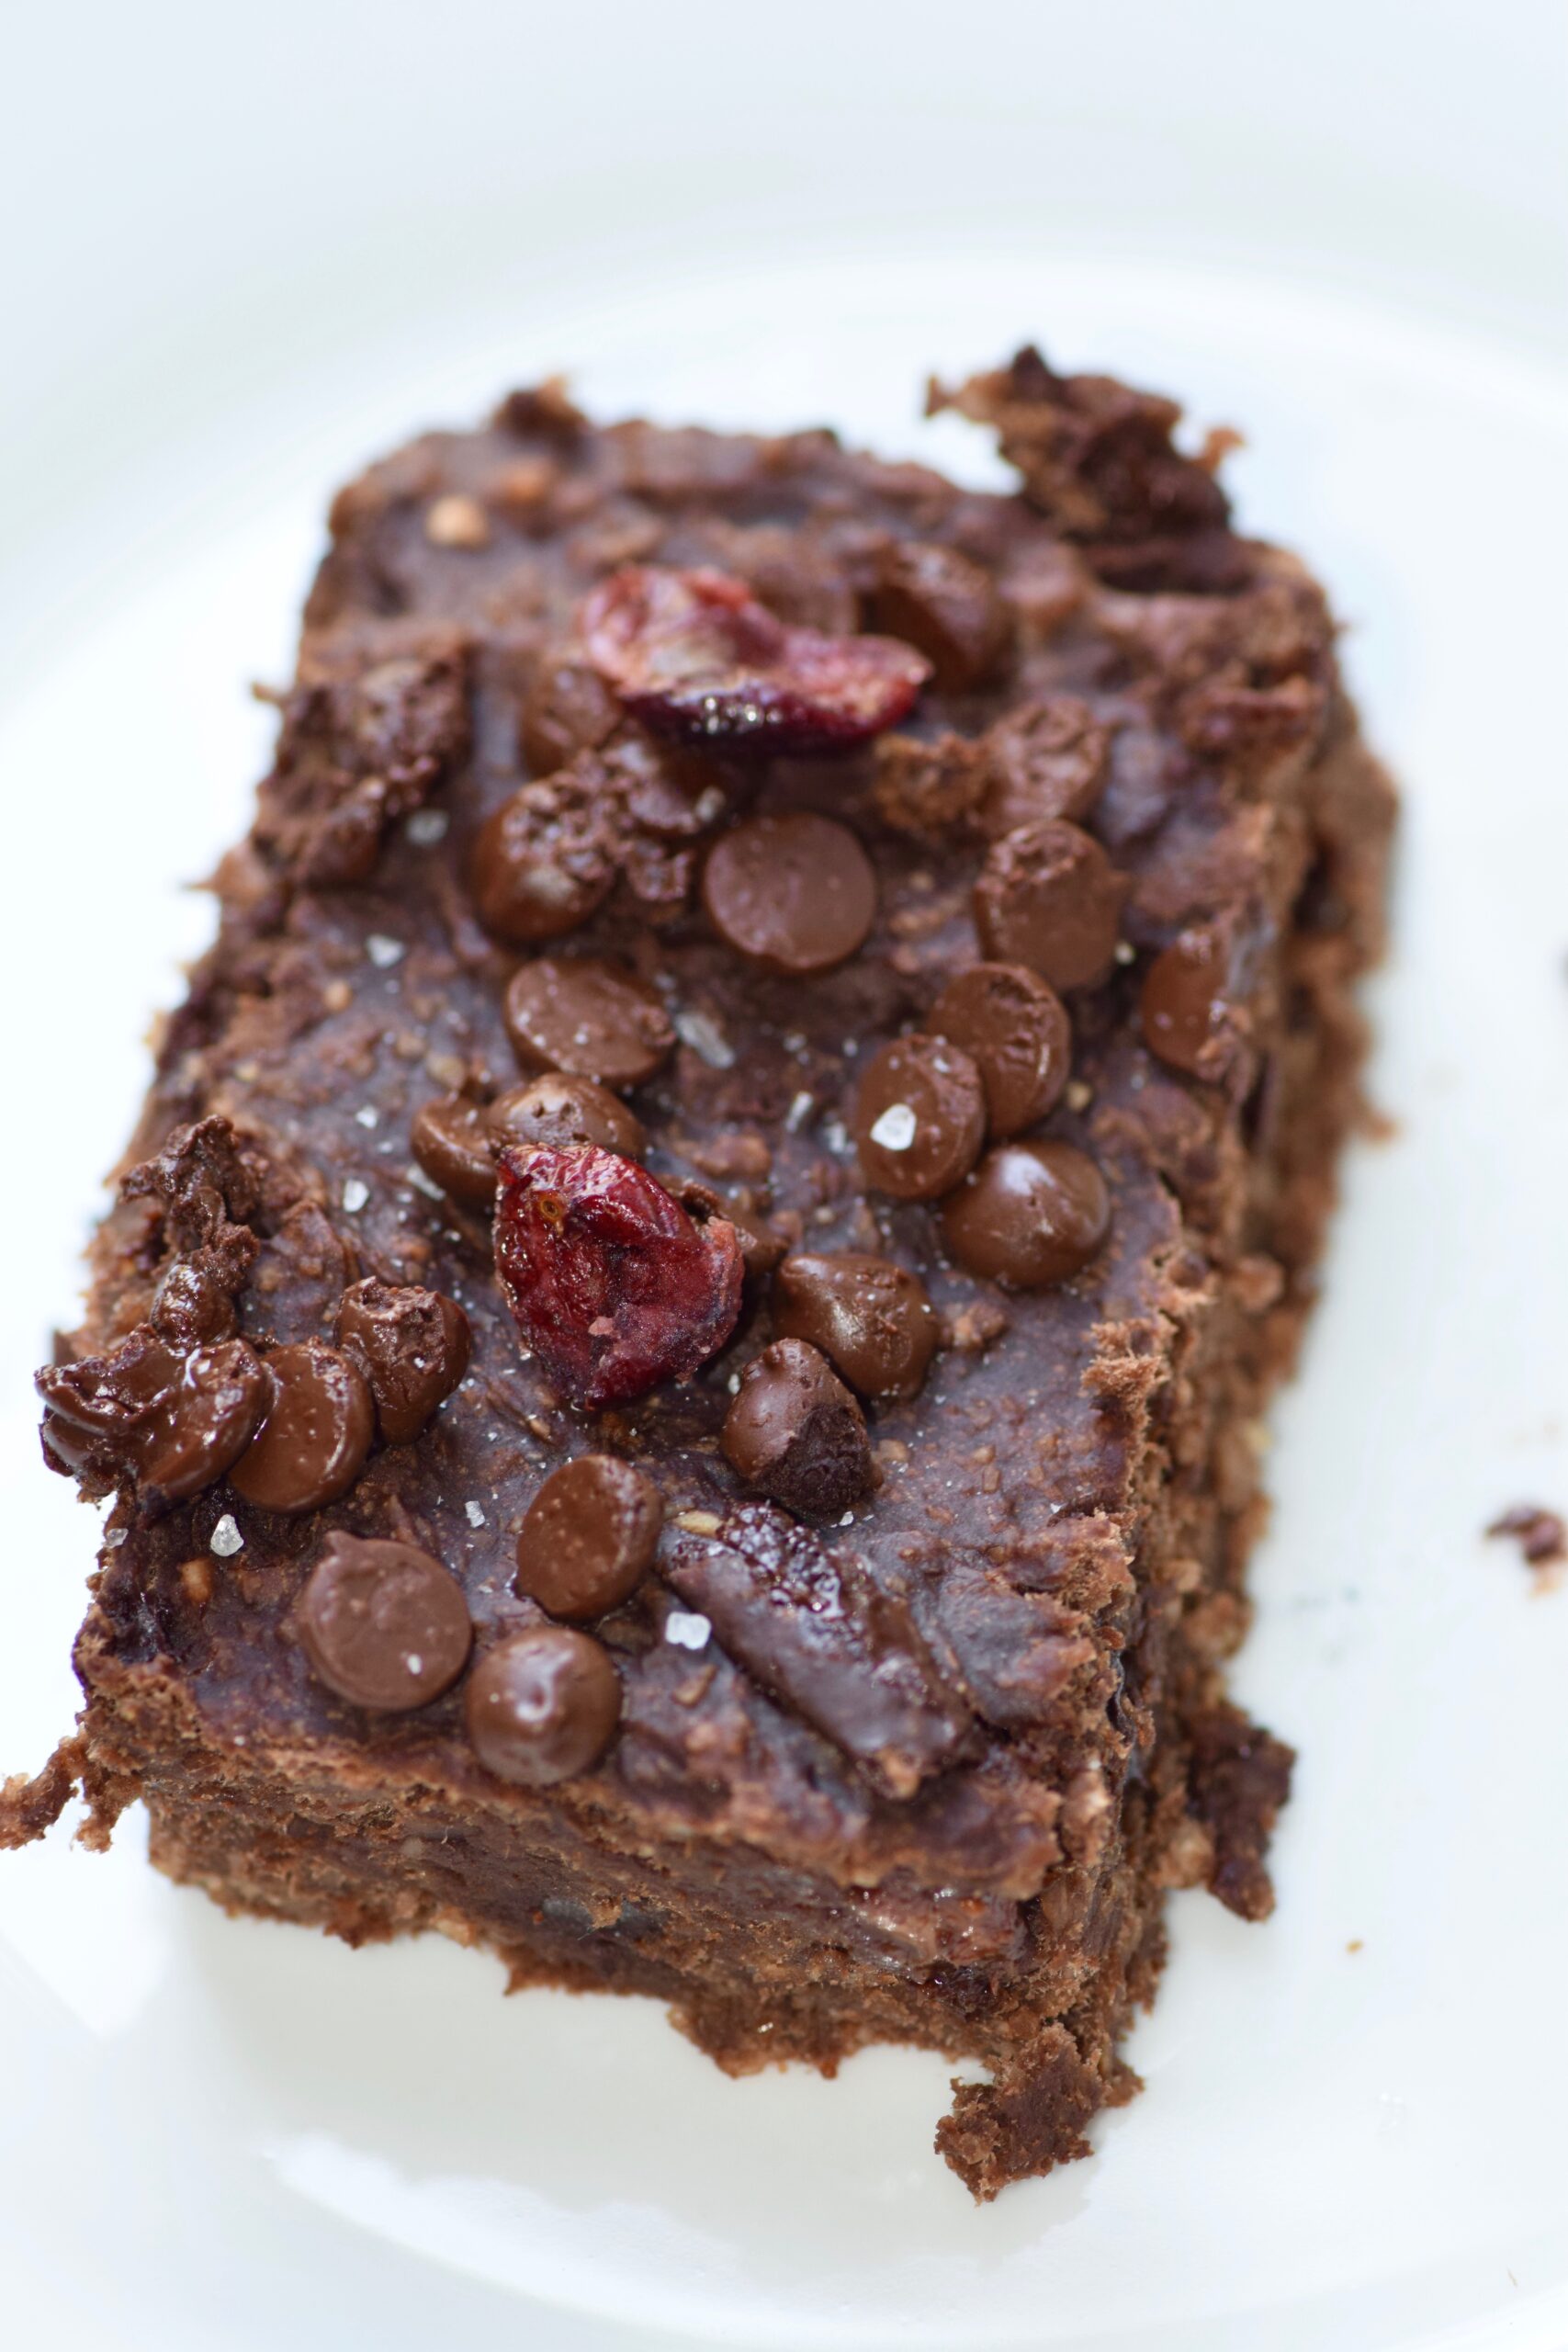 Oatmeal breakfast chocolate brownies with cranberries